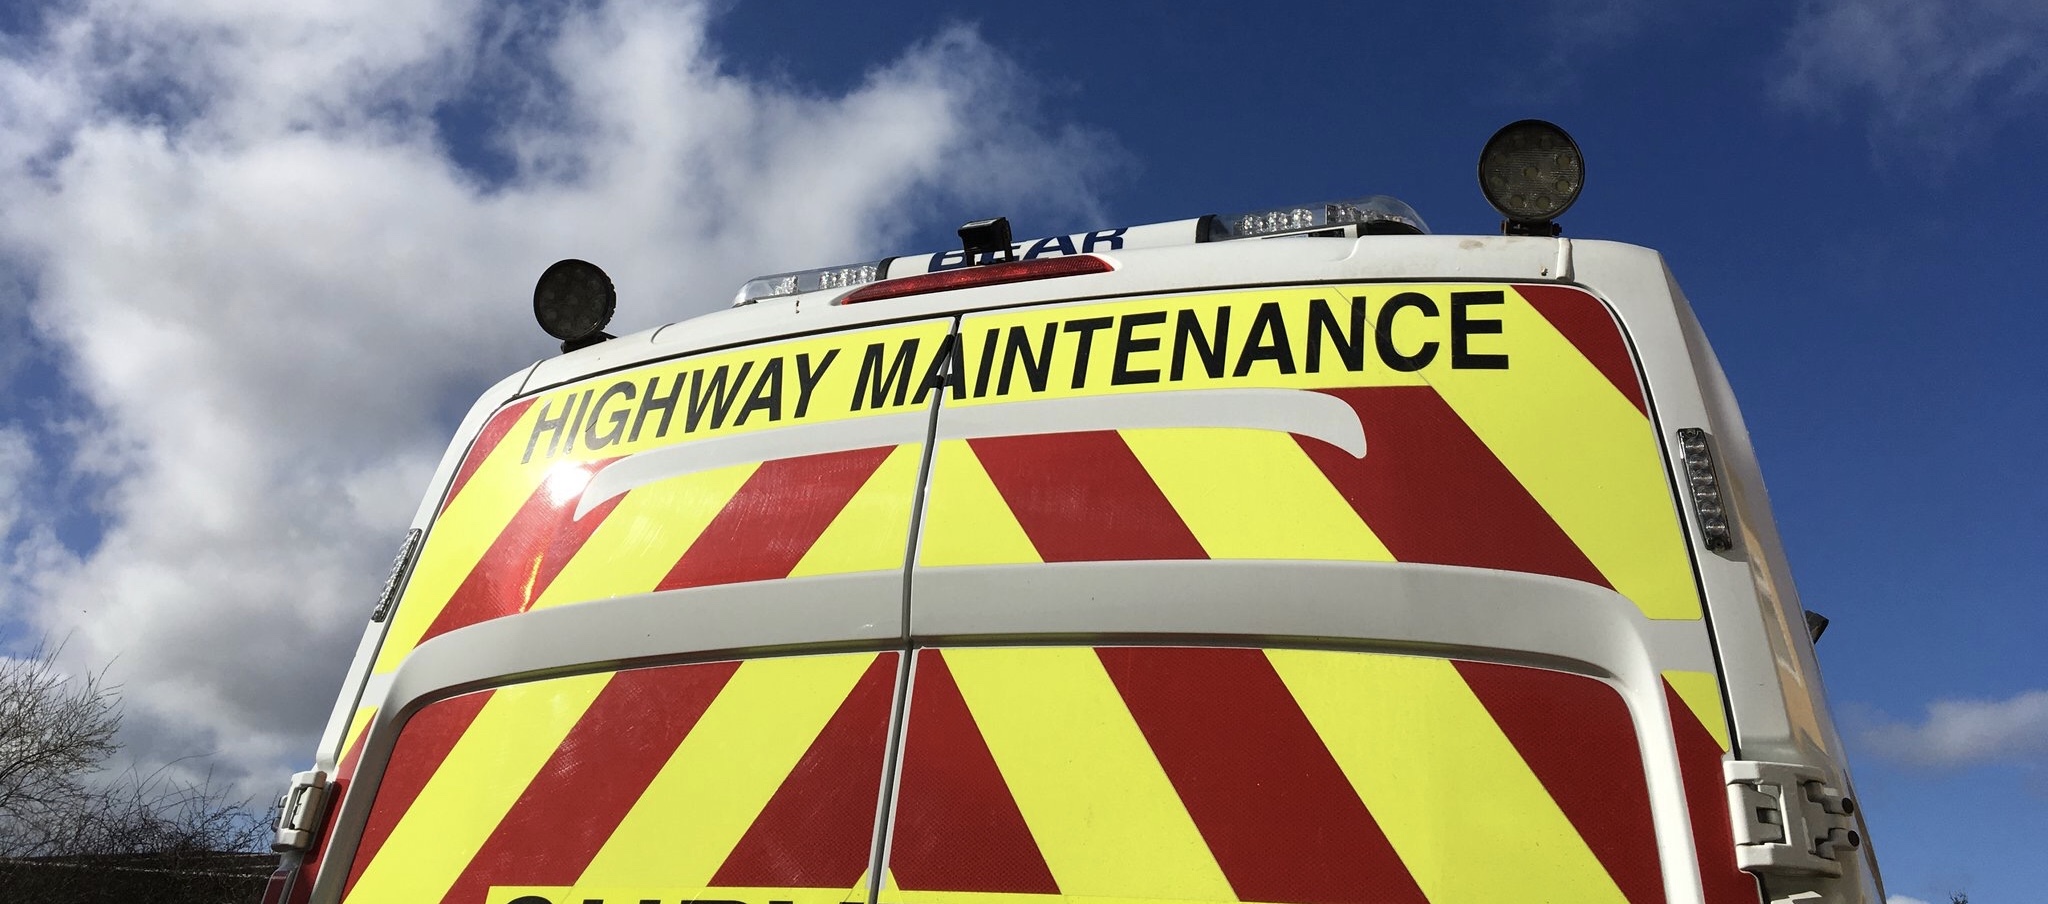 WEEKEND SURFACING IMPROVEMENTS PLANNED FOR A92 IN DUNDEE